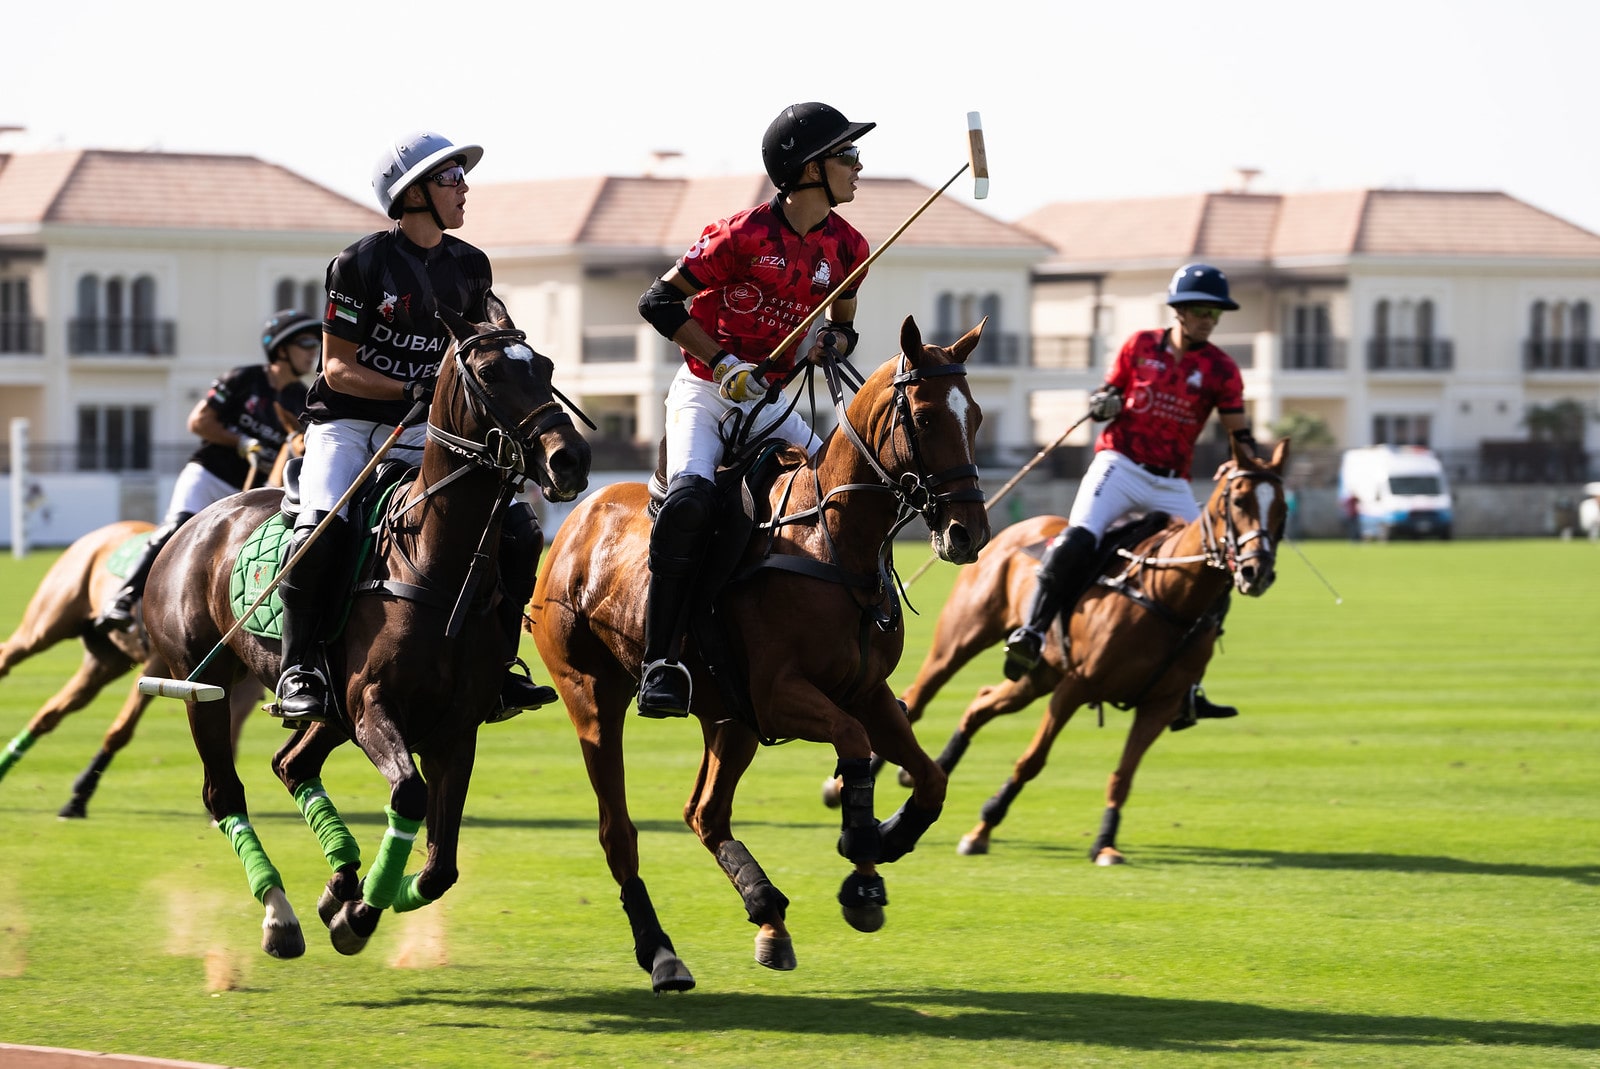 IFZA partners with habtoor polo organisation to sponsor habtoor polo team at the Dubai gold cup series